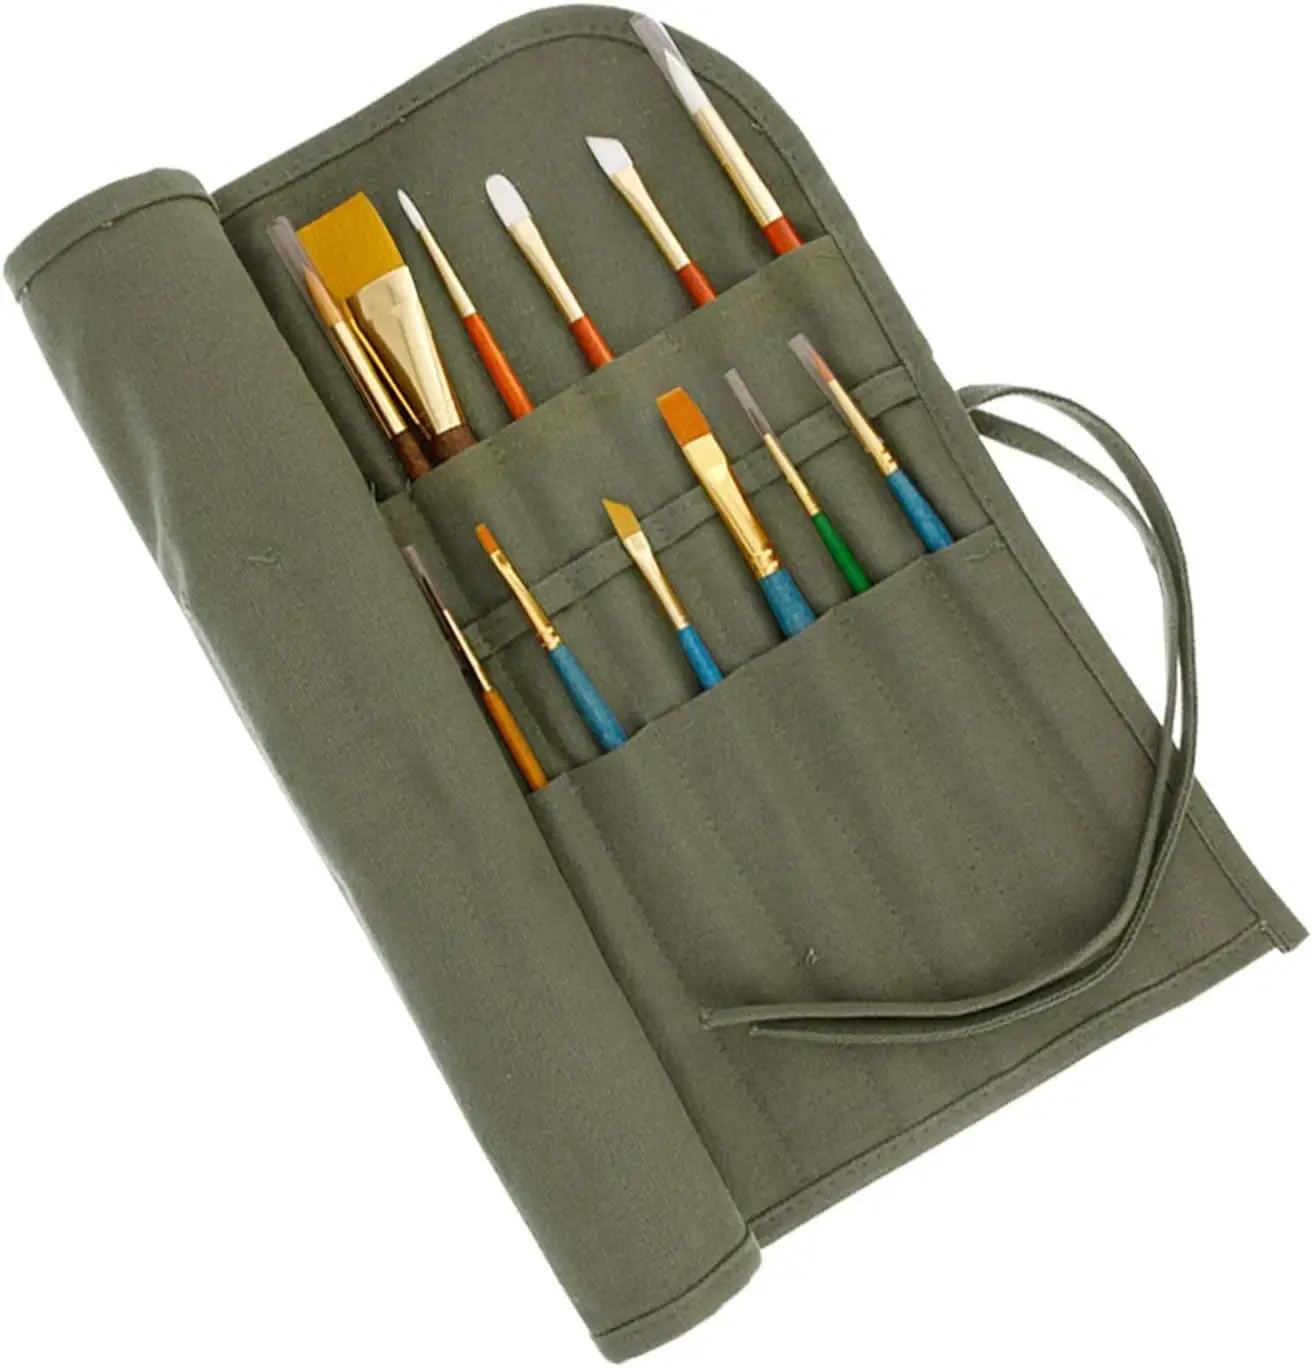 Deluxe Canvas Art Paint Brush Holder Storage Organizer Roll Up Case Bag 24 Slots Pockets Carry Pouch